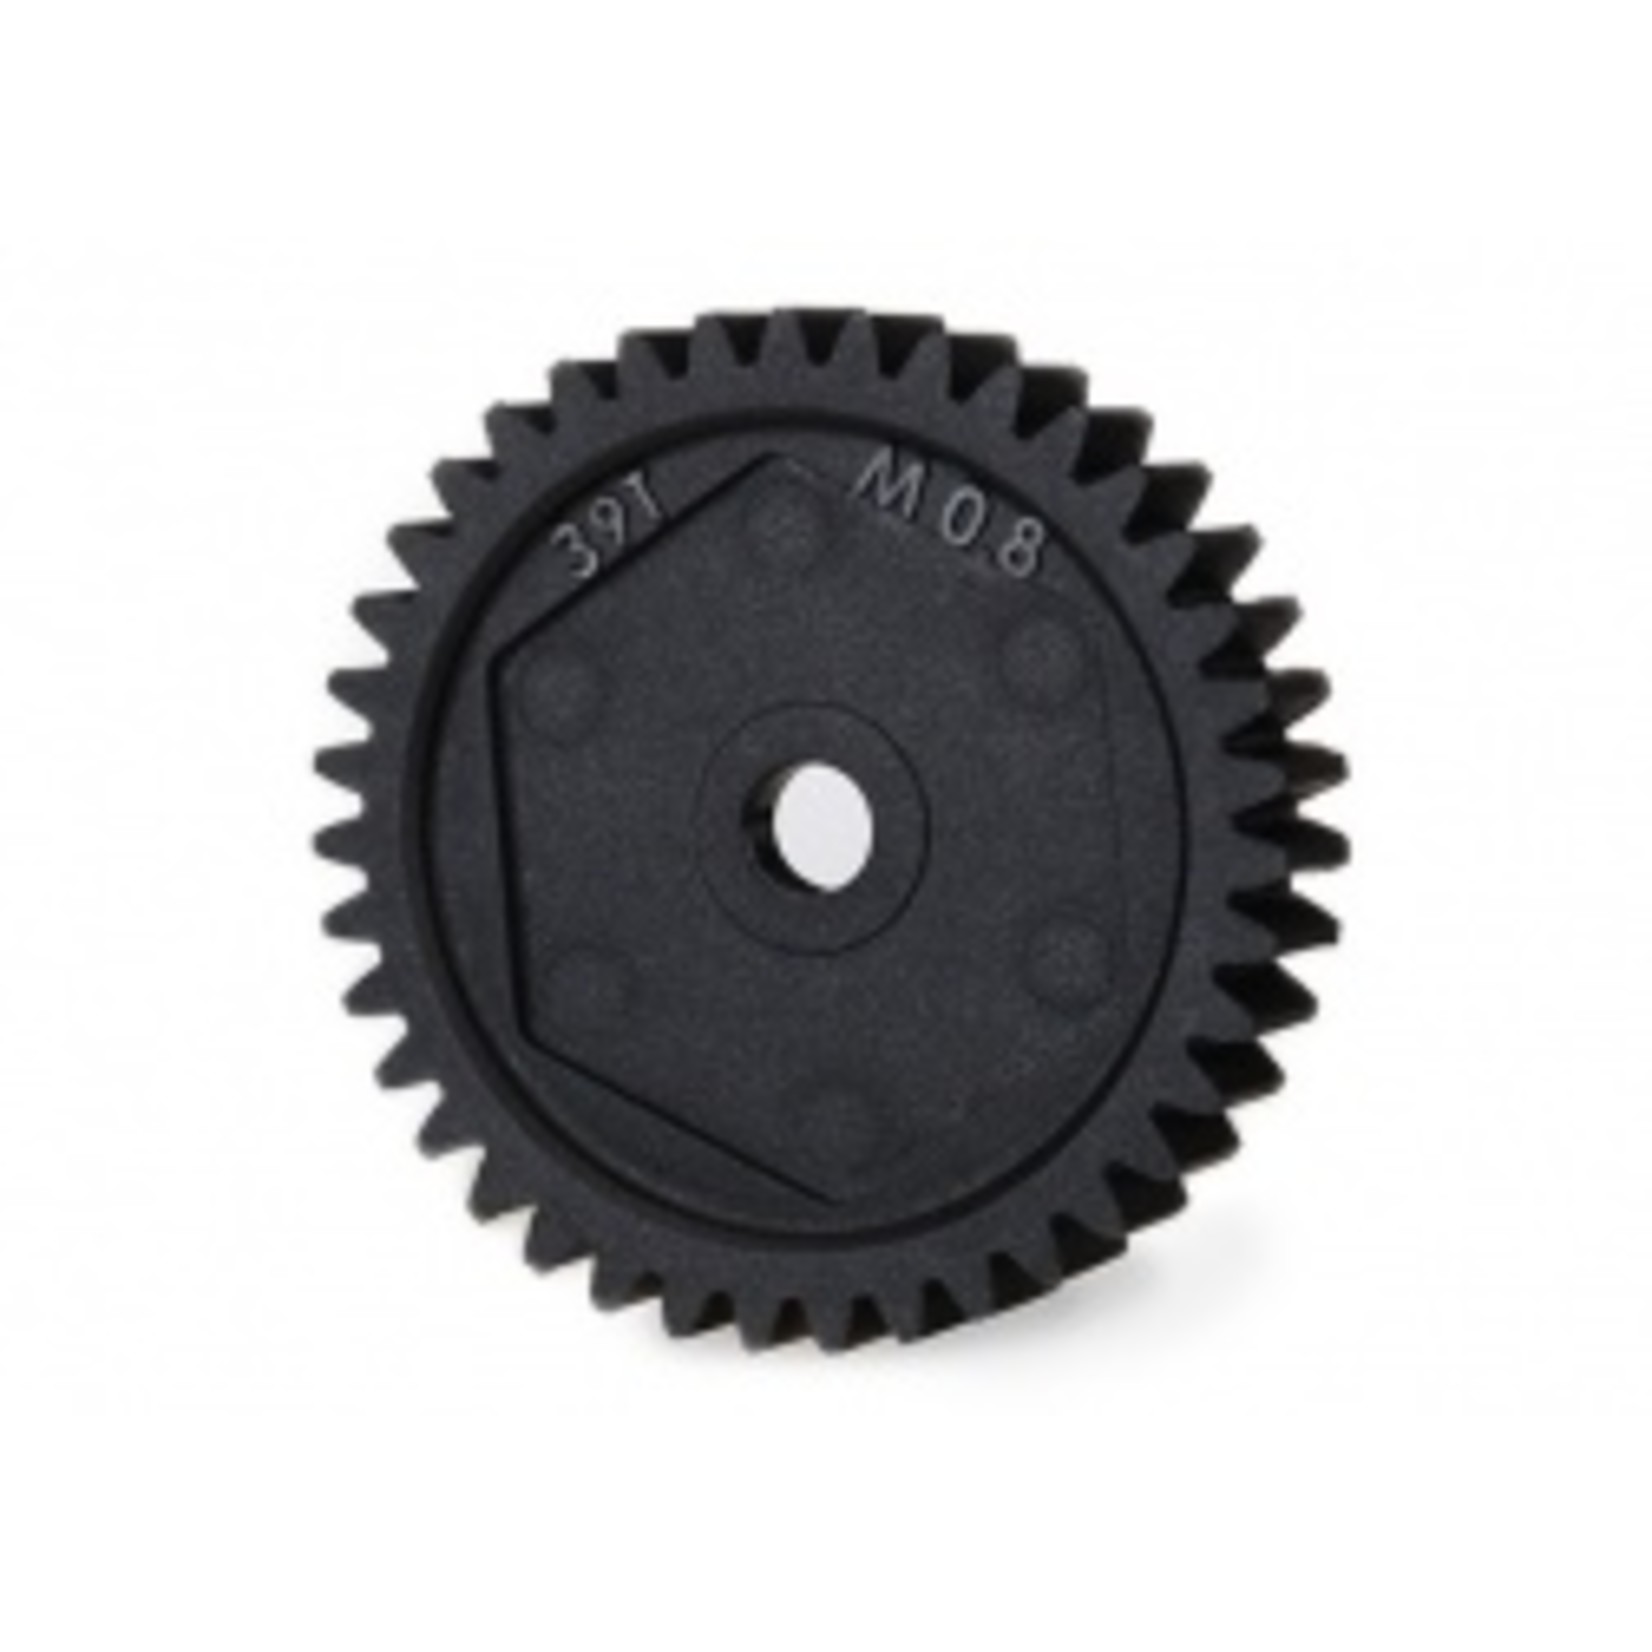 Traxxas 8052 Spur gear, 39-tooth (32-pitch)